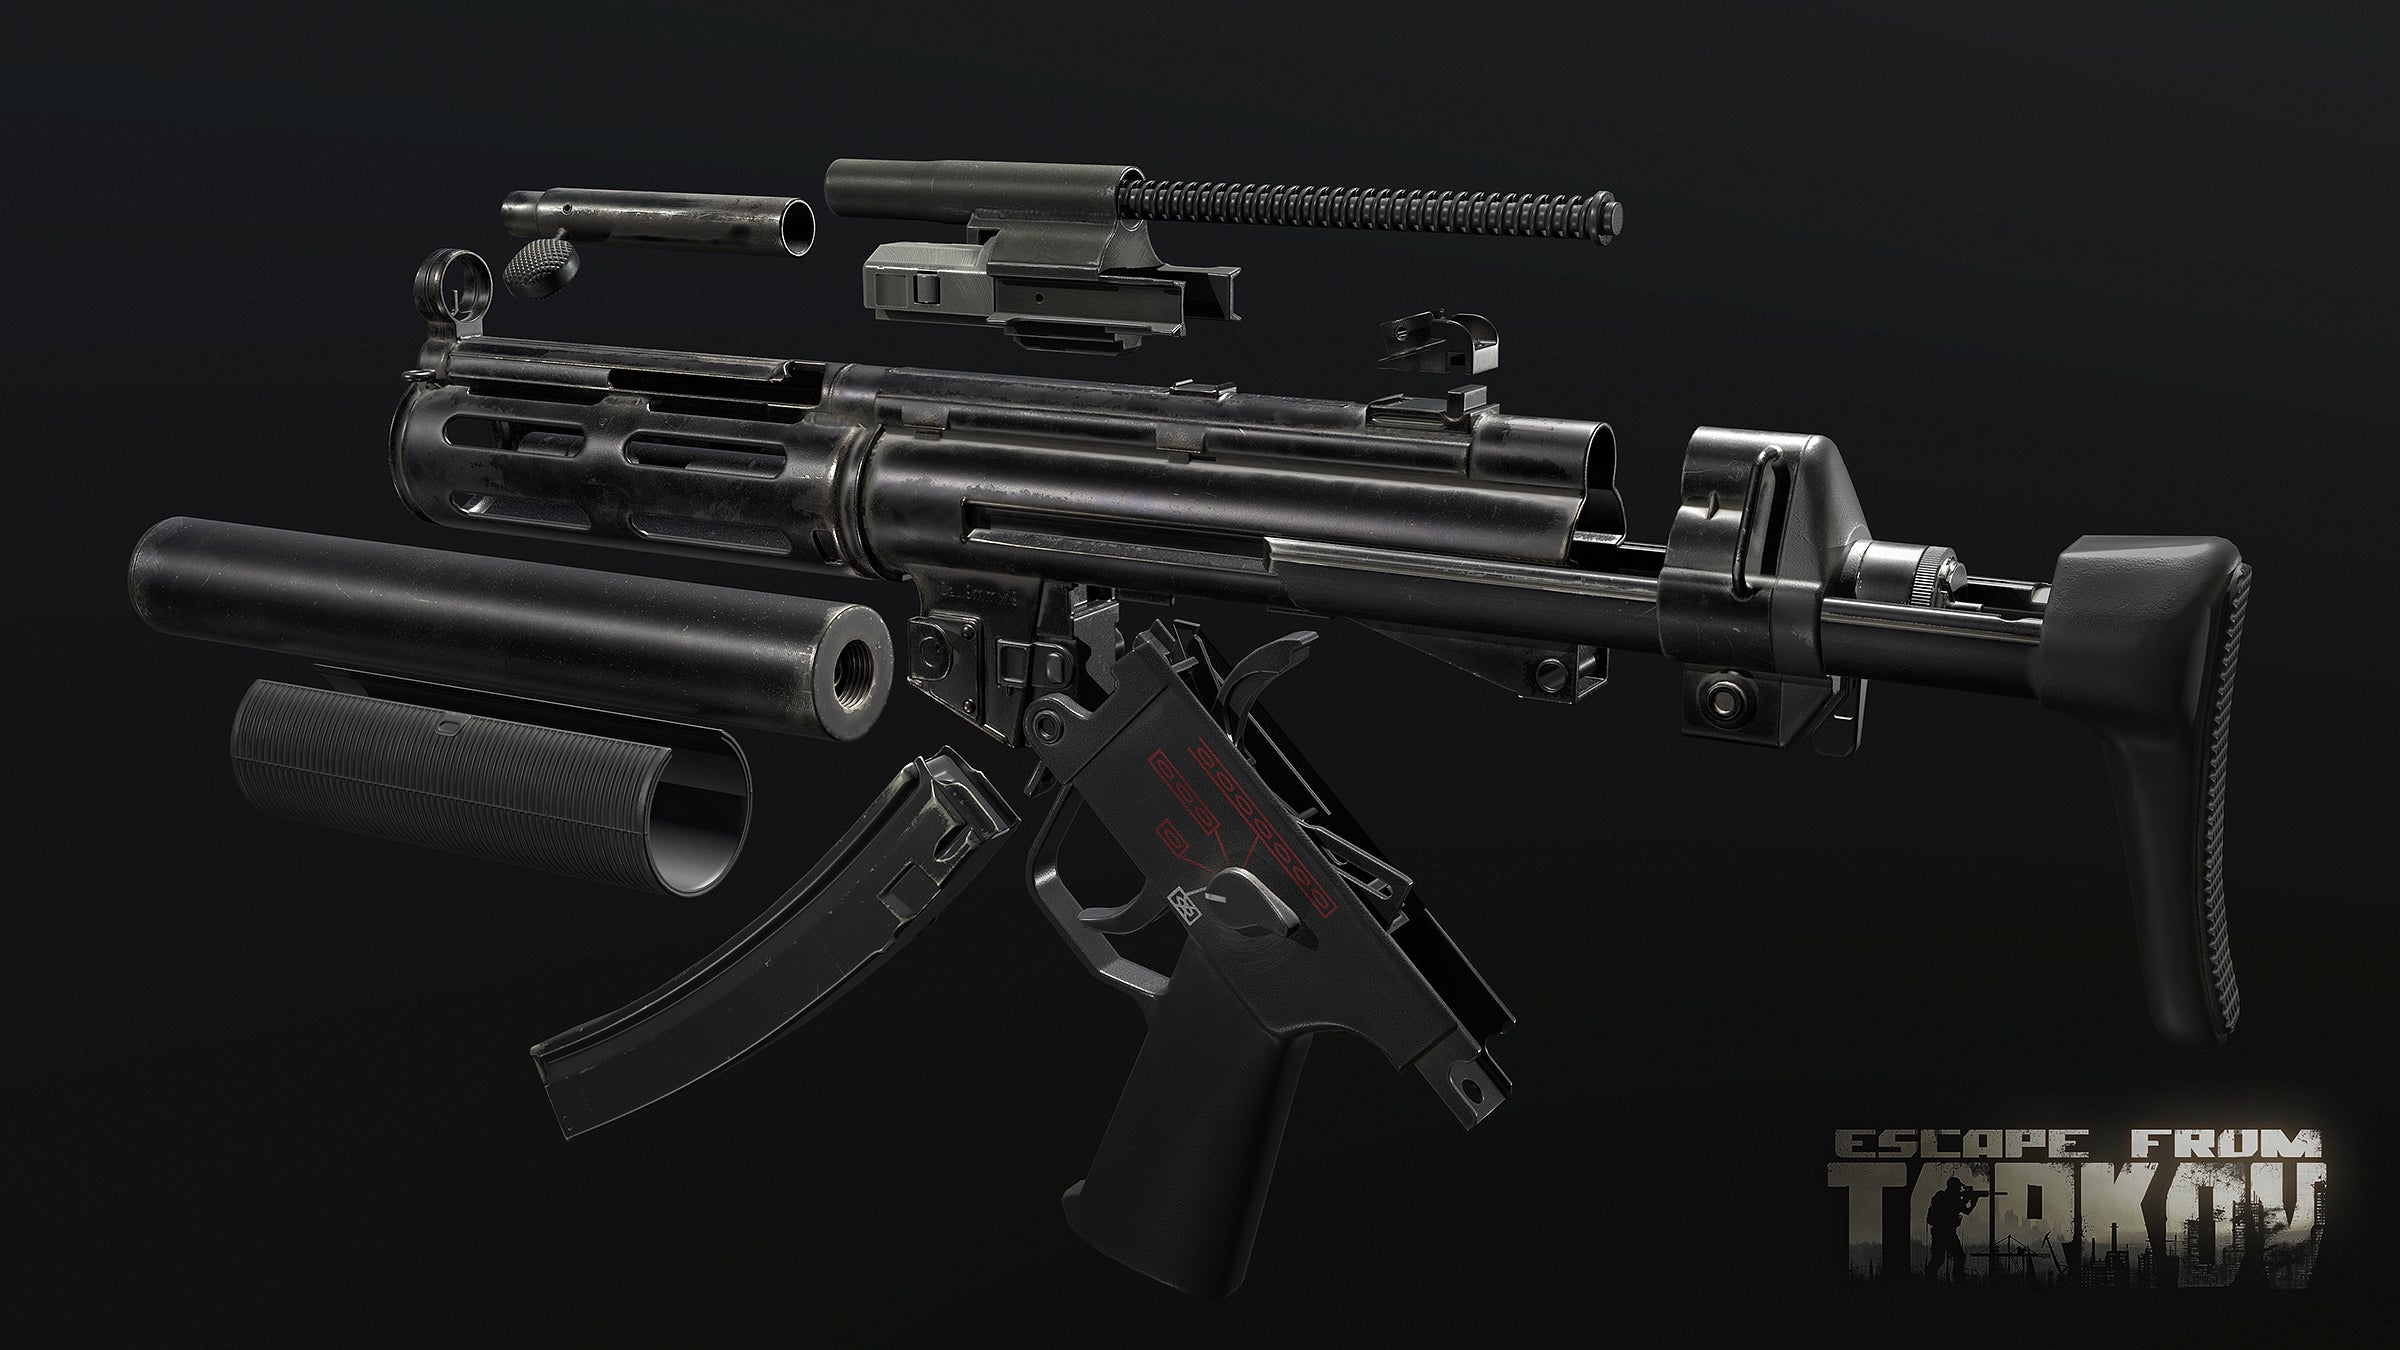 A screenshot of a gun from Escape From Tarkov, disassembled into different parts for construction and reconstruction